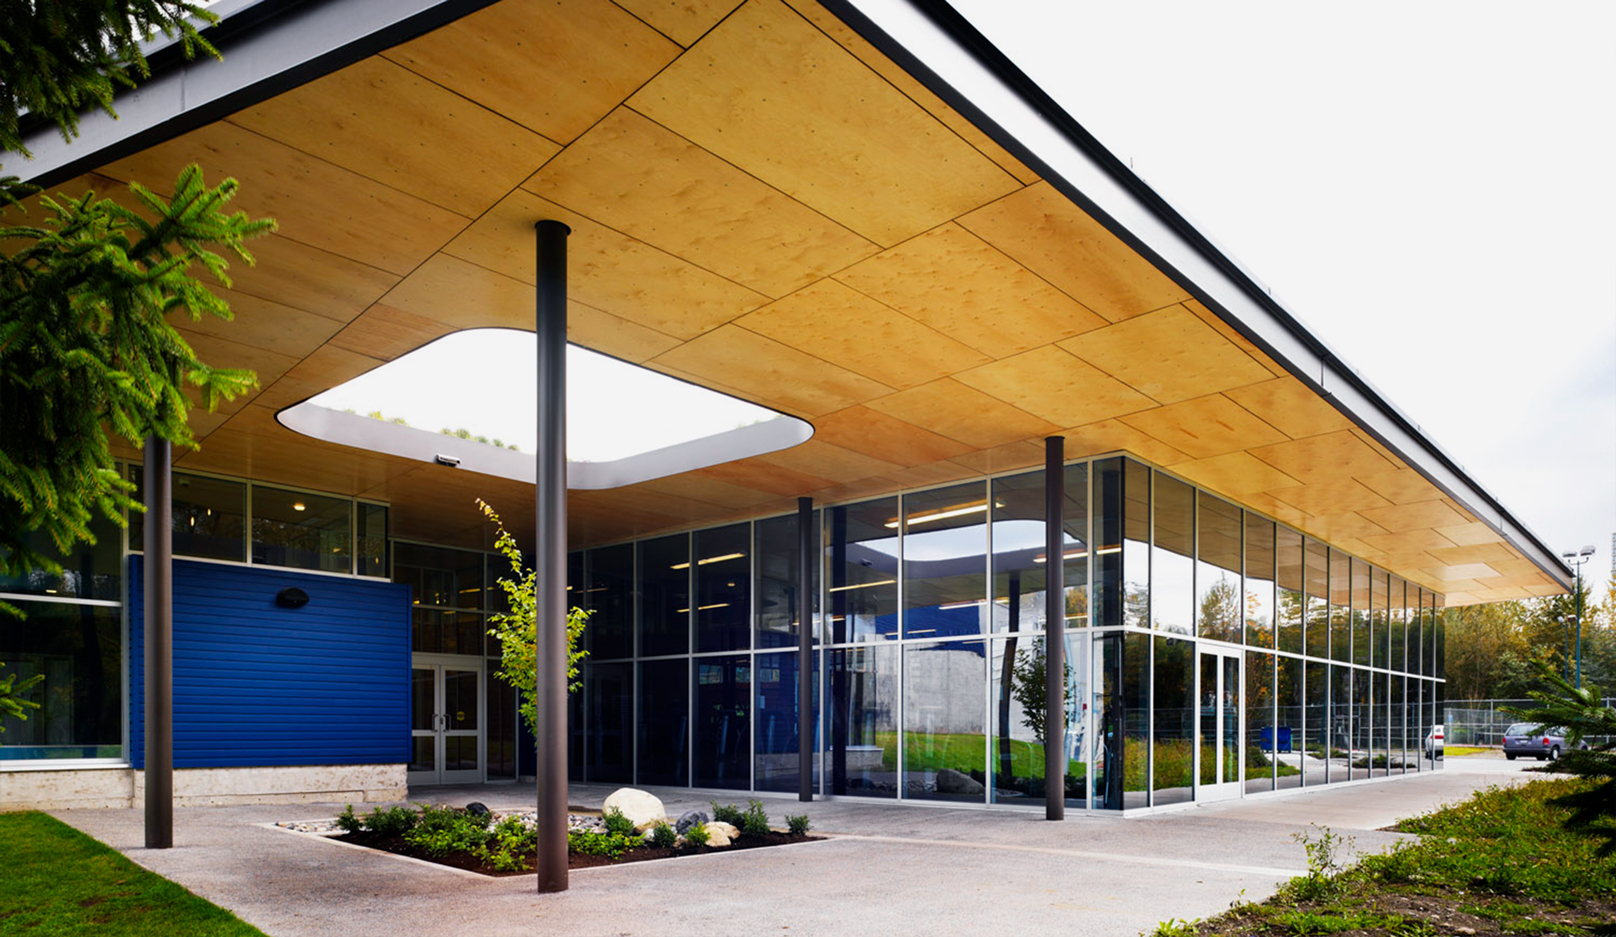 The front entrance of Port Moody Recreation Centre. It showcases a wooden overhang with a rounded square skylight, leading to a garden below.